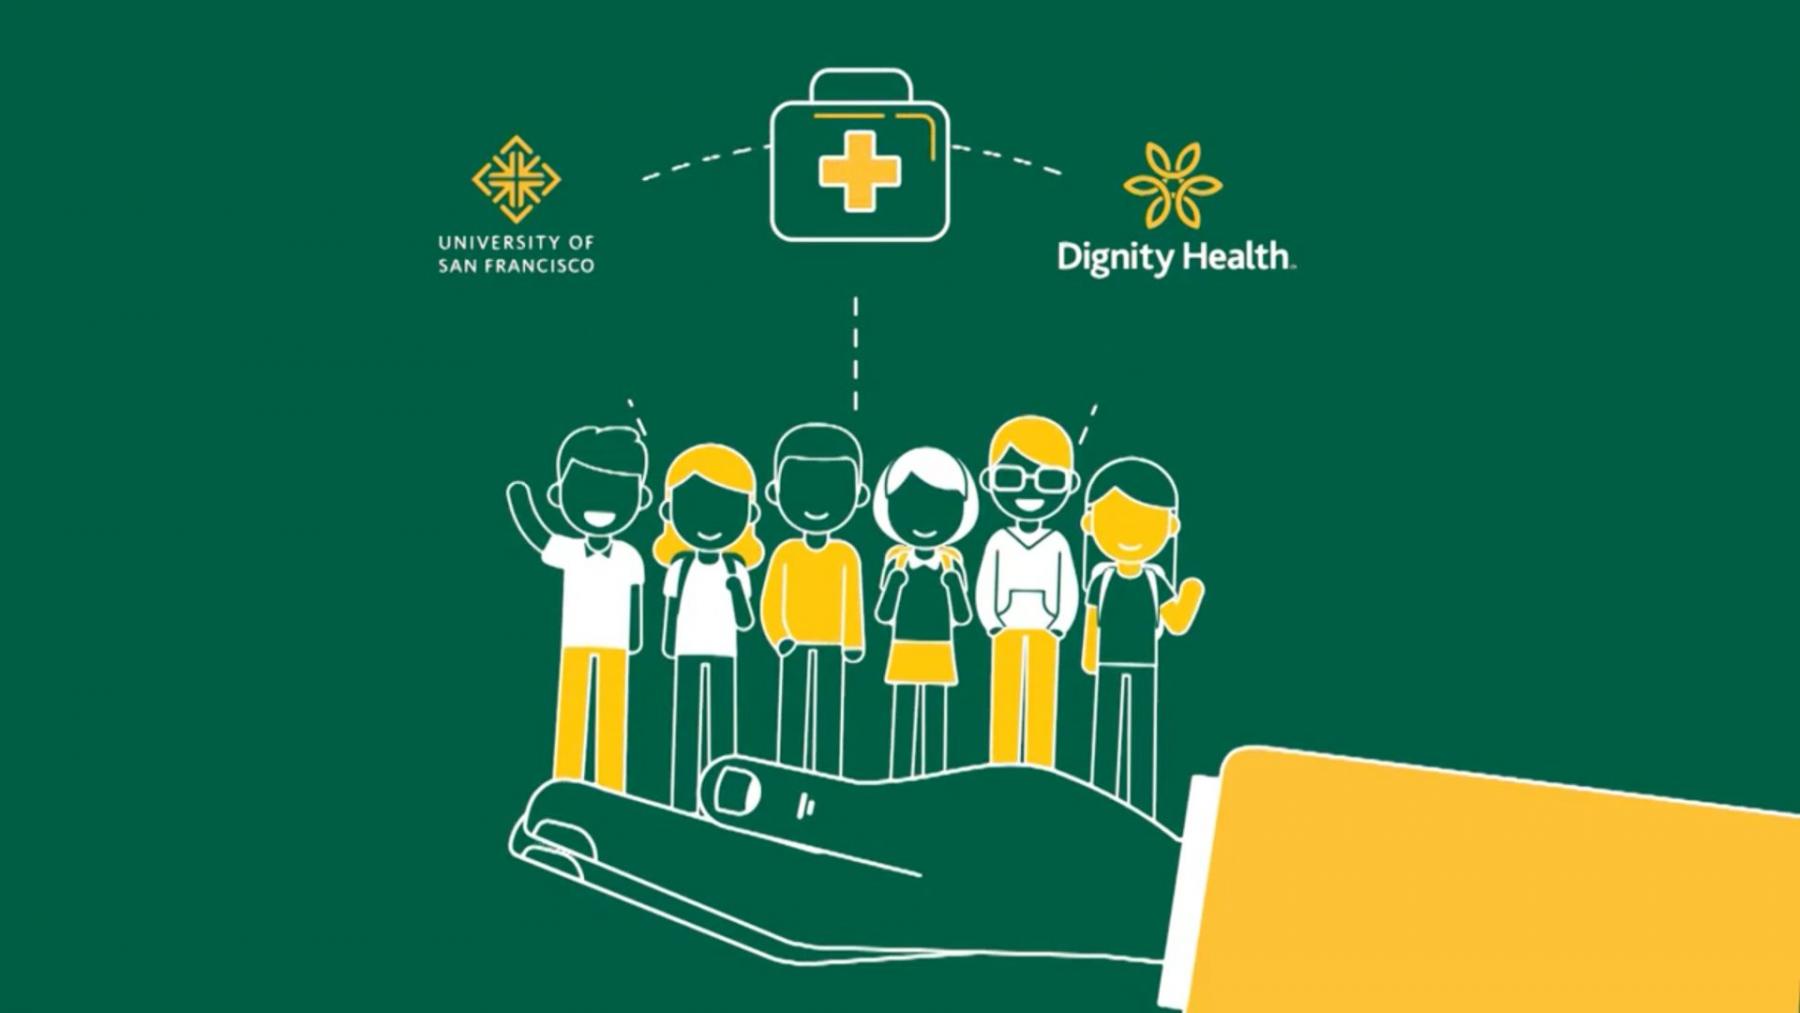 illustration of giant hand holding up people to represent accessing healthcare